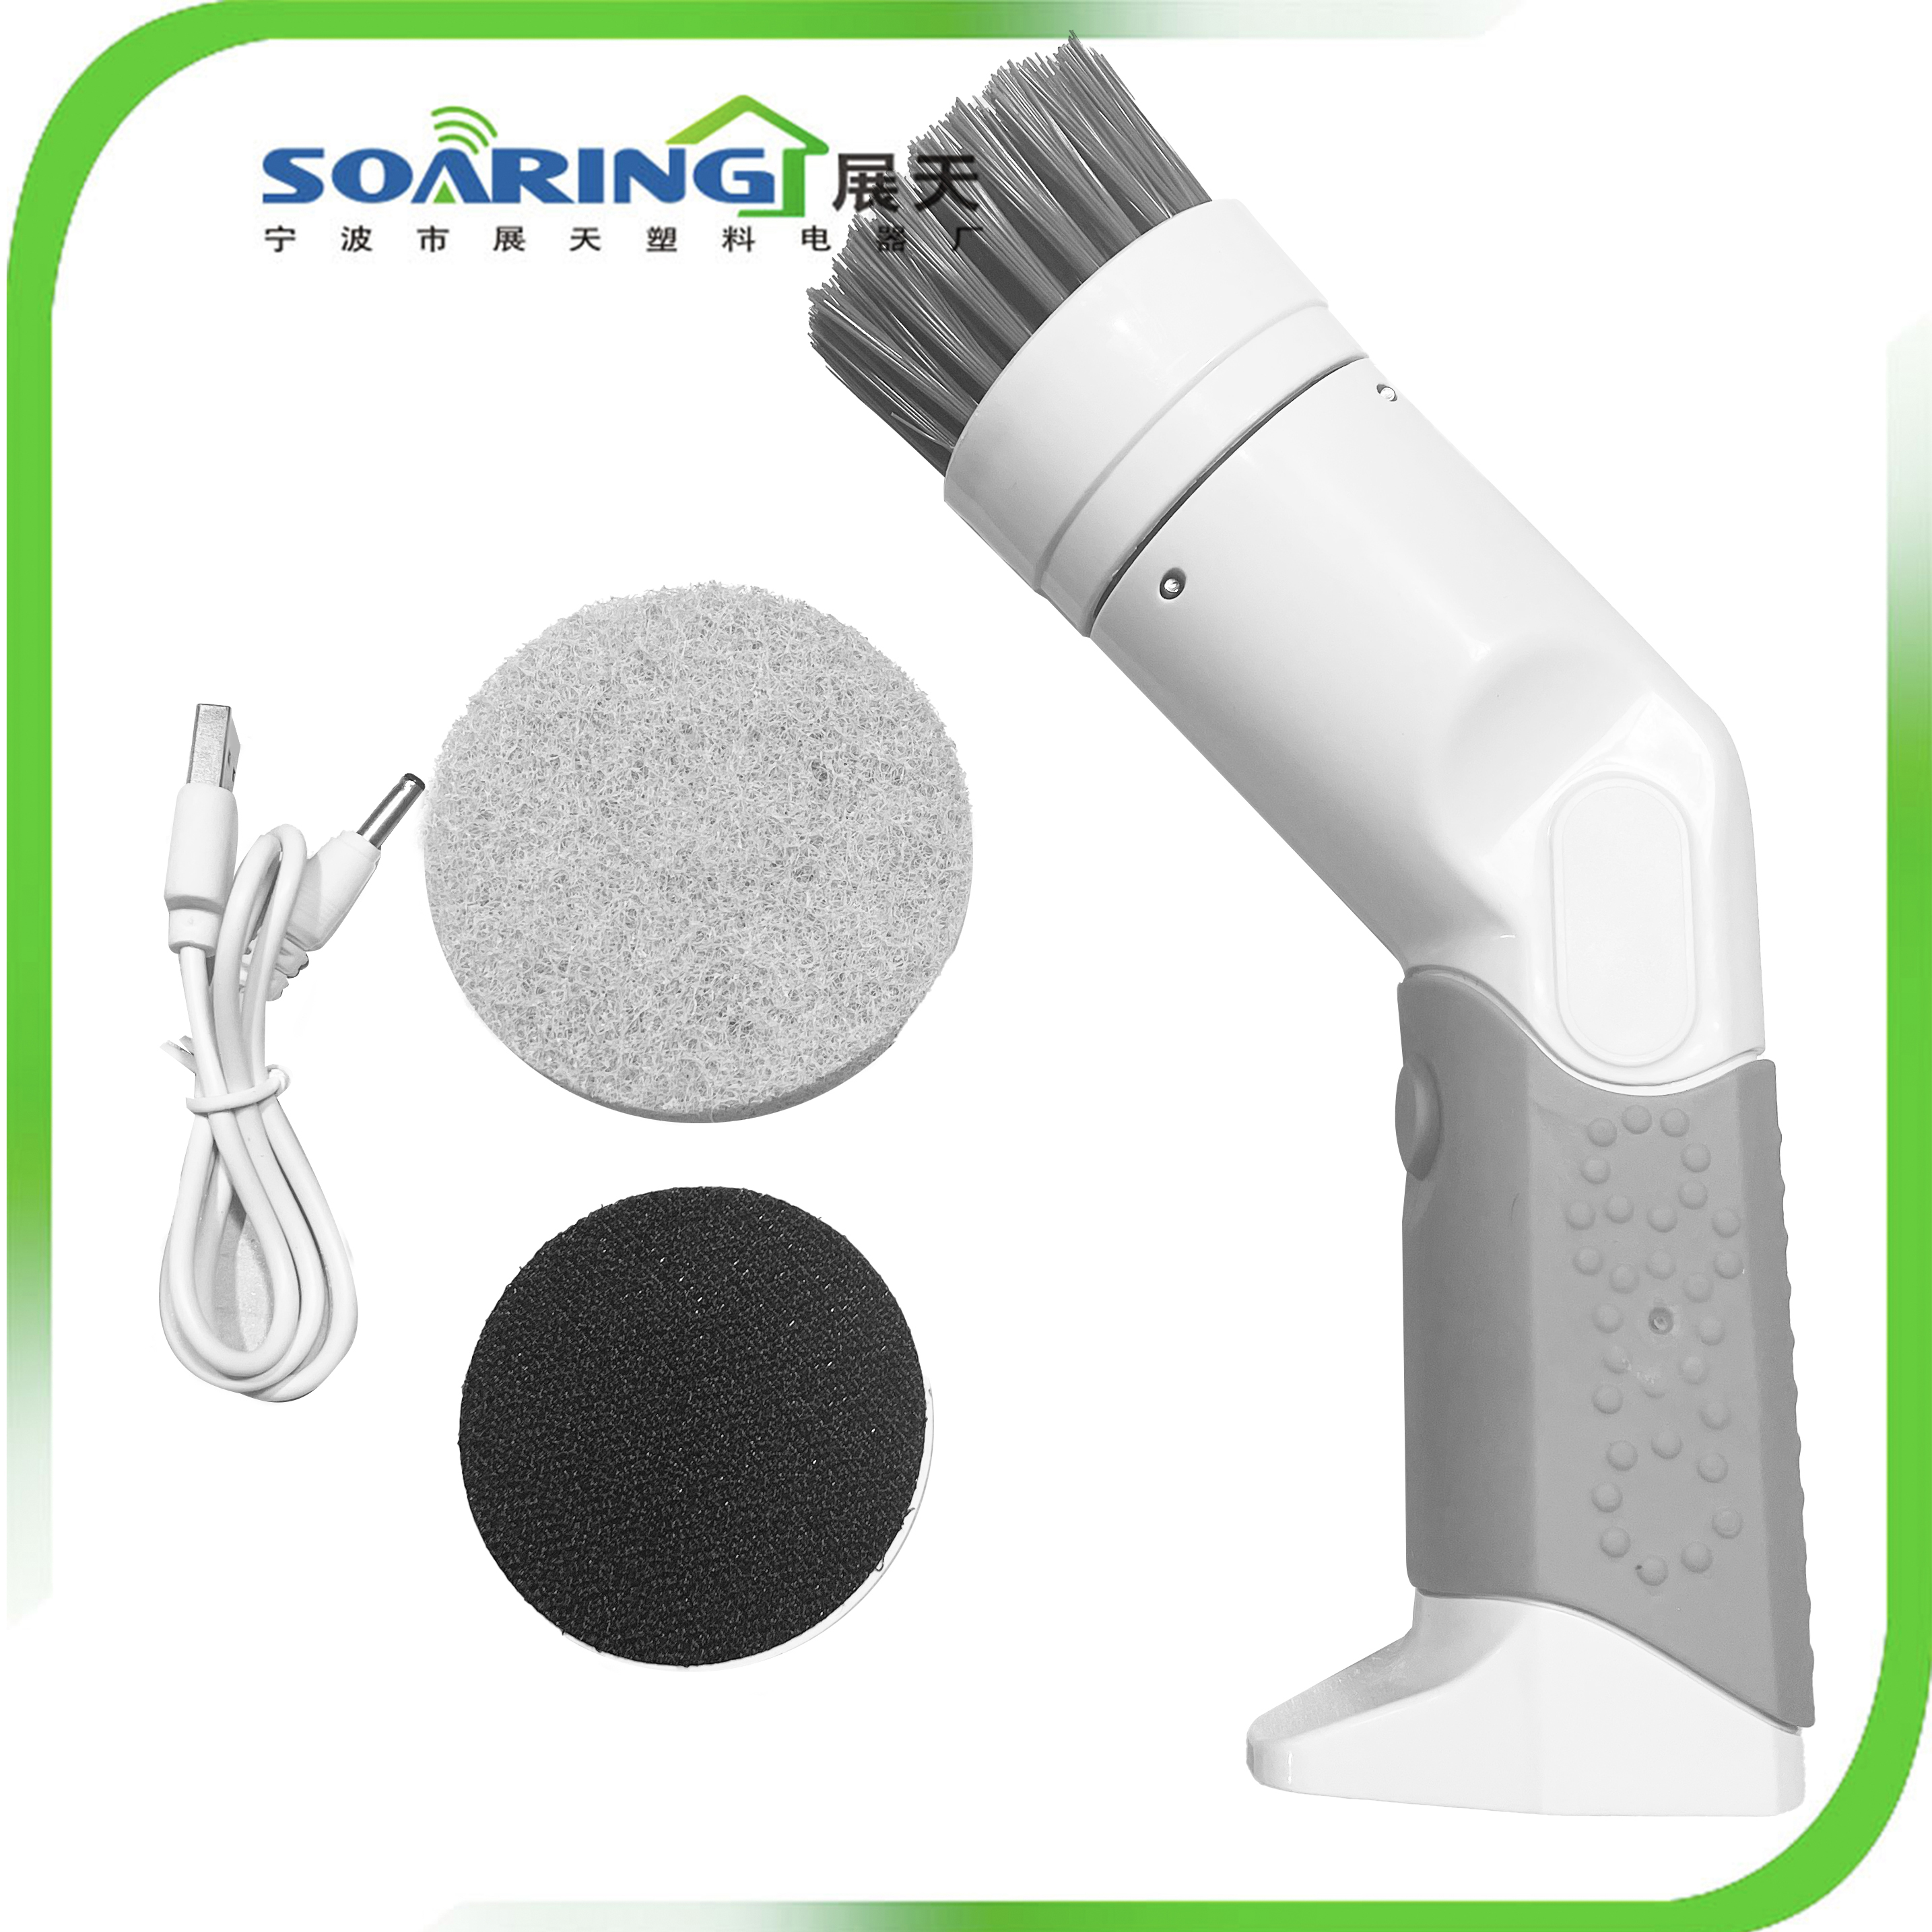 Domus Sonic Cleaning Tool Turbo Electronic Spin Power Scrubber Brush Kit - 0 